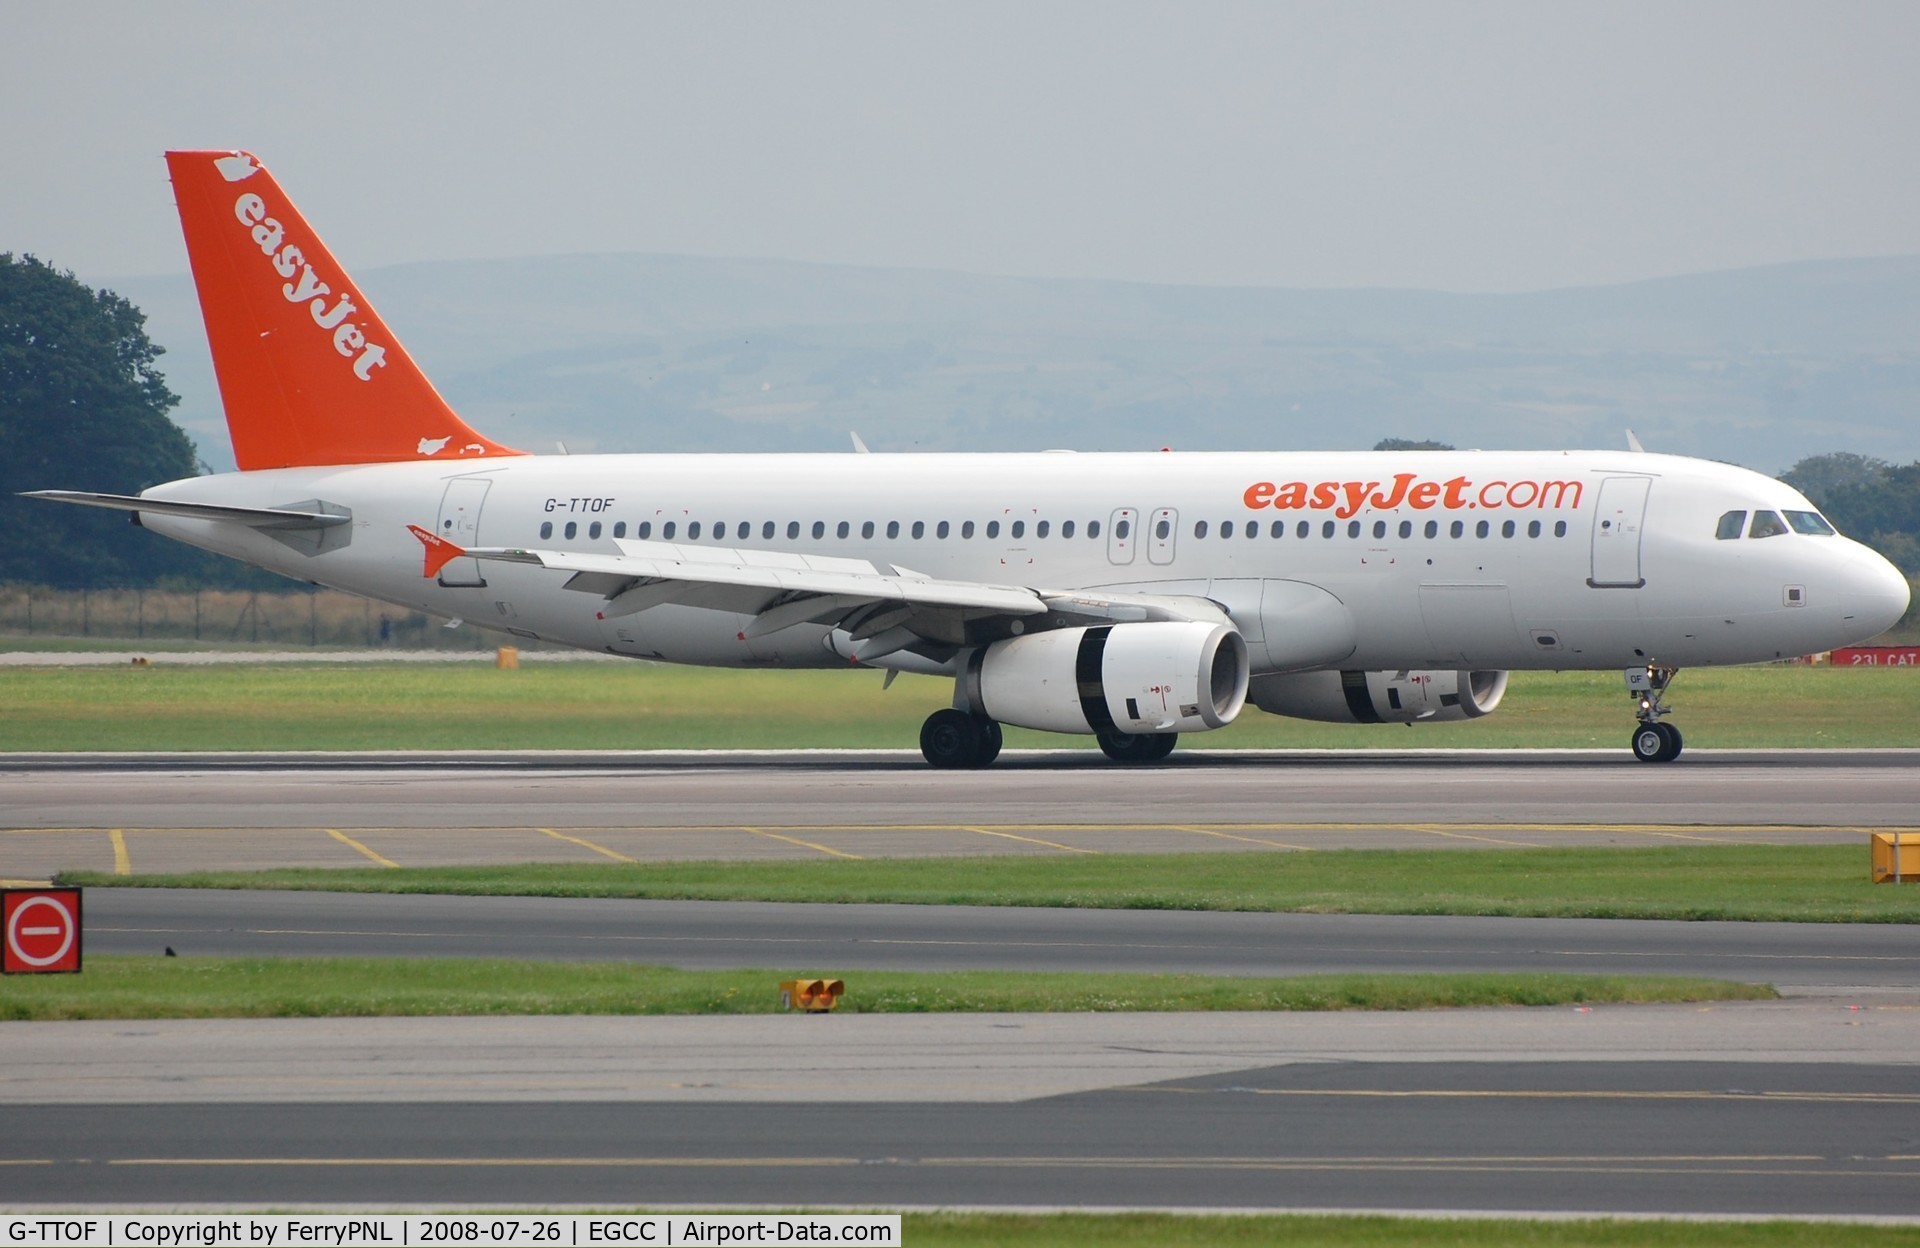 G-TTOF, 2002 Airbus A320-232 C/N 1918, Easyjet A320 landed.